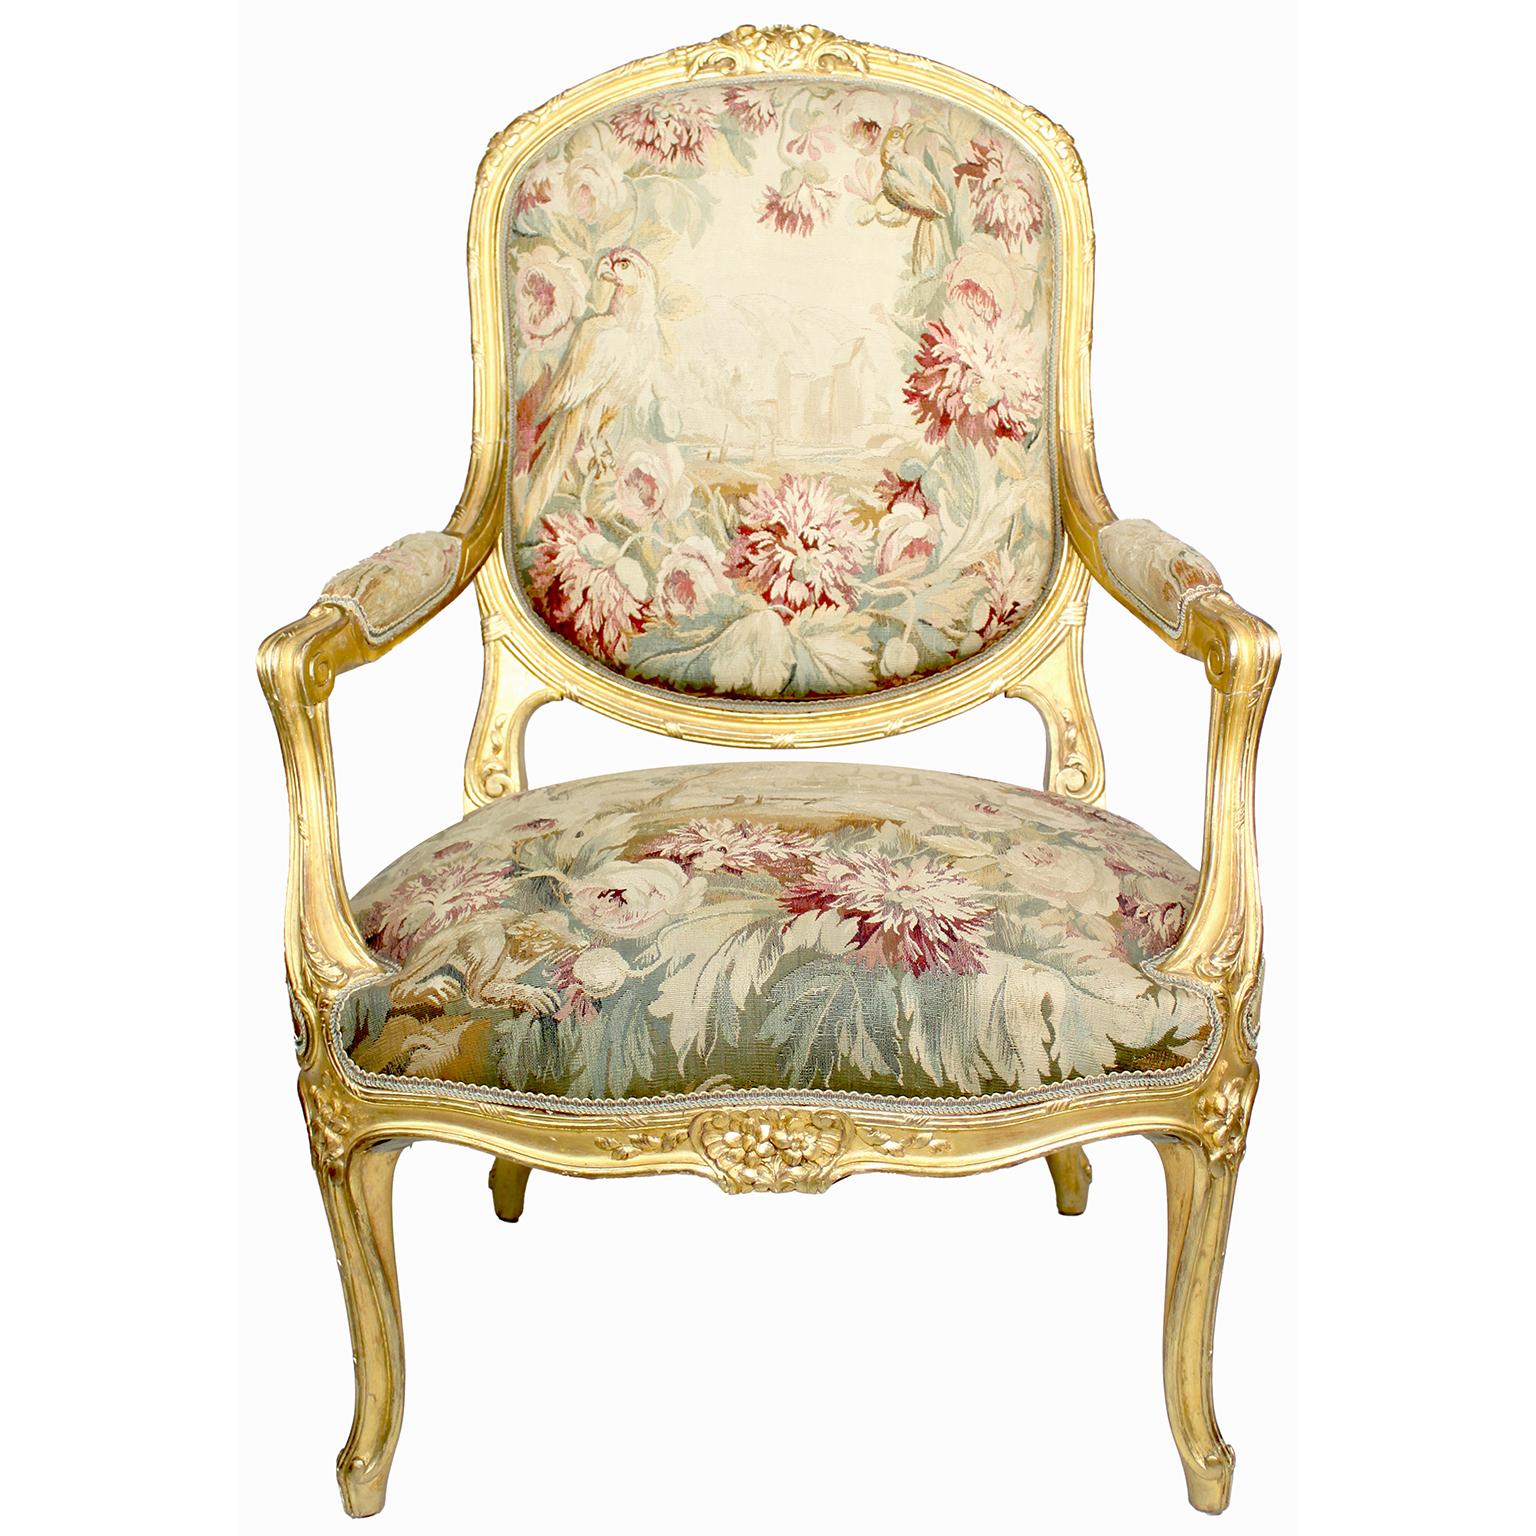 French 19th Century Louis XV Style Three-Piece Giltwood and Aubusson Salon Suite For Sale 6